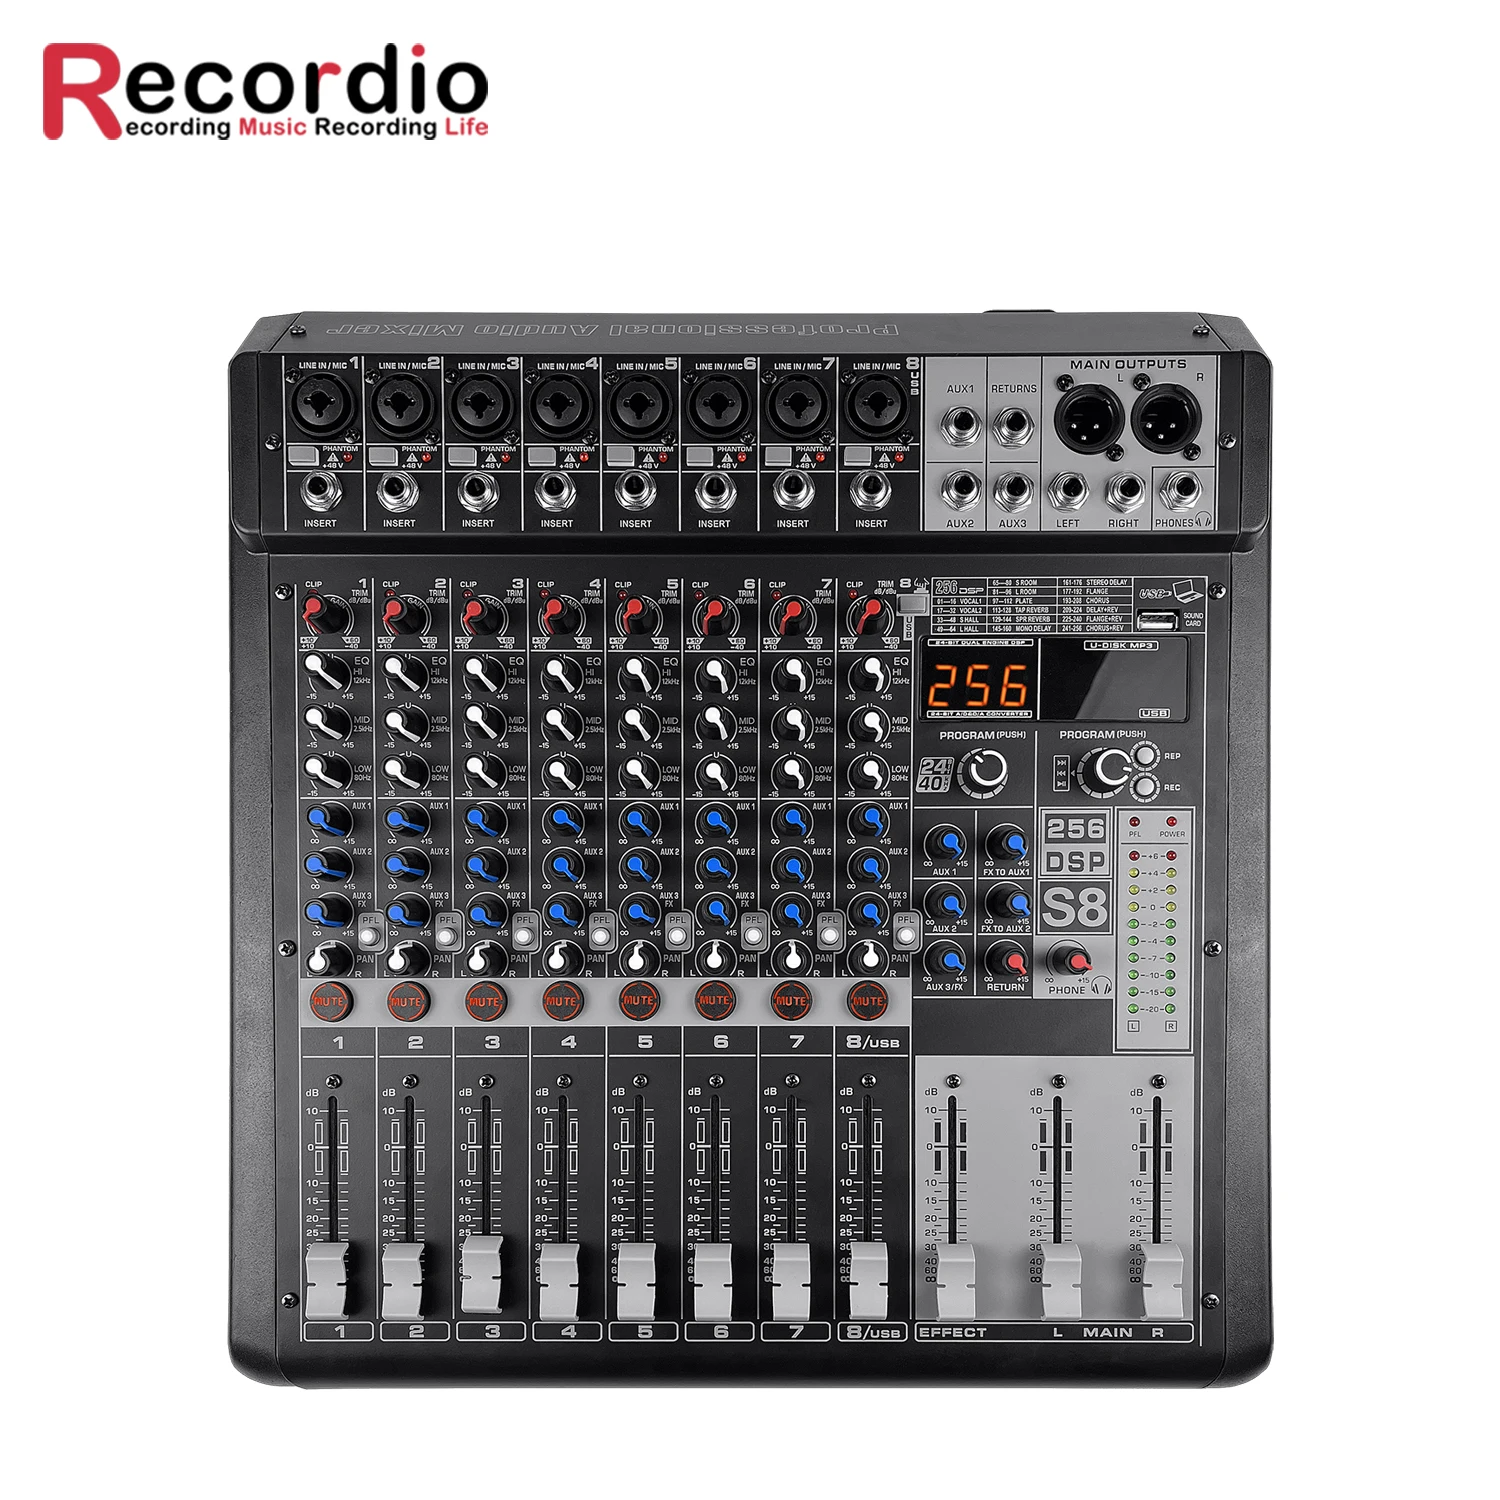 

GAX-S8 Pro 8 Channel DJ Controller with 256 DSP Reverb effect BT 5.0 USB Mixer USB for karaoke Professional stage performance